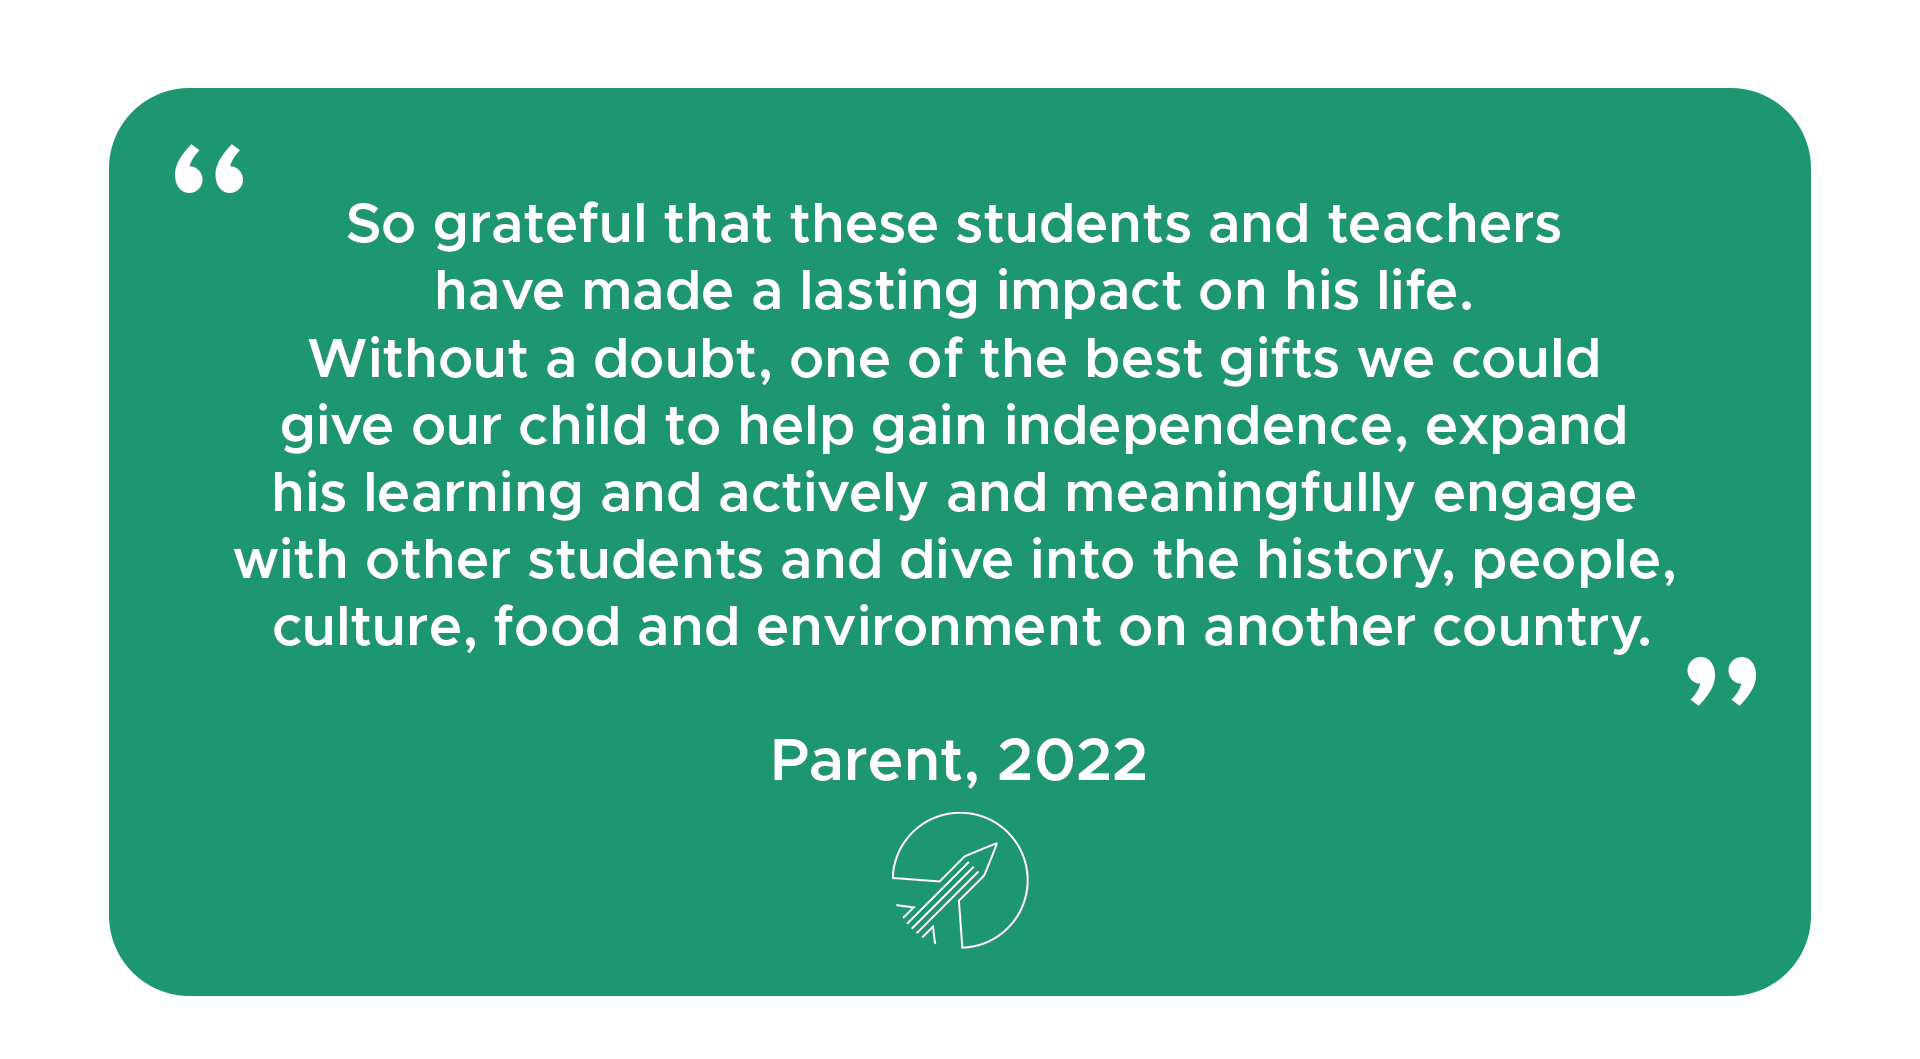 "So grateful that these students and teachers have made a lasting impact on his life. Without a doubt, one of the best gifts we could give our child to help gain independence, expand his learning and actively and meaningfully engage with other students and dive into the history, people, culture, food and environment on another country." - Parent, 2022